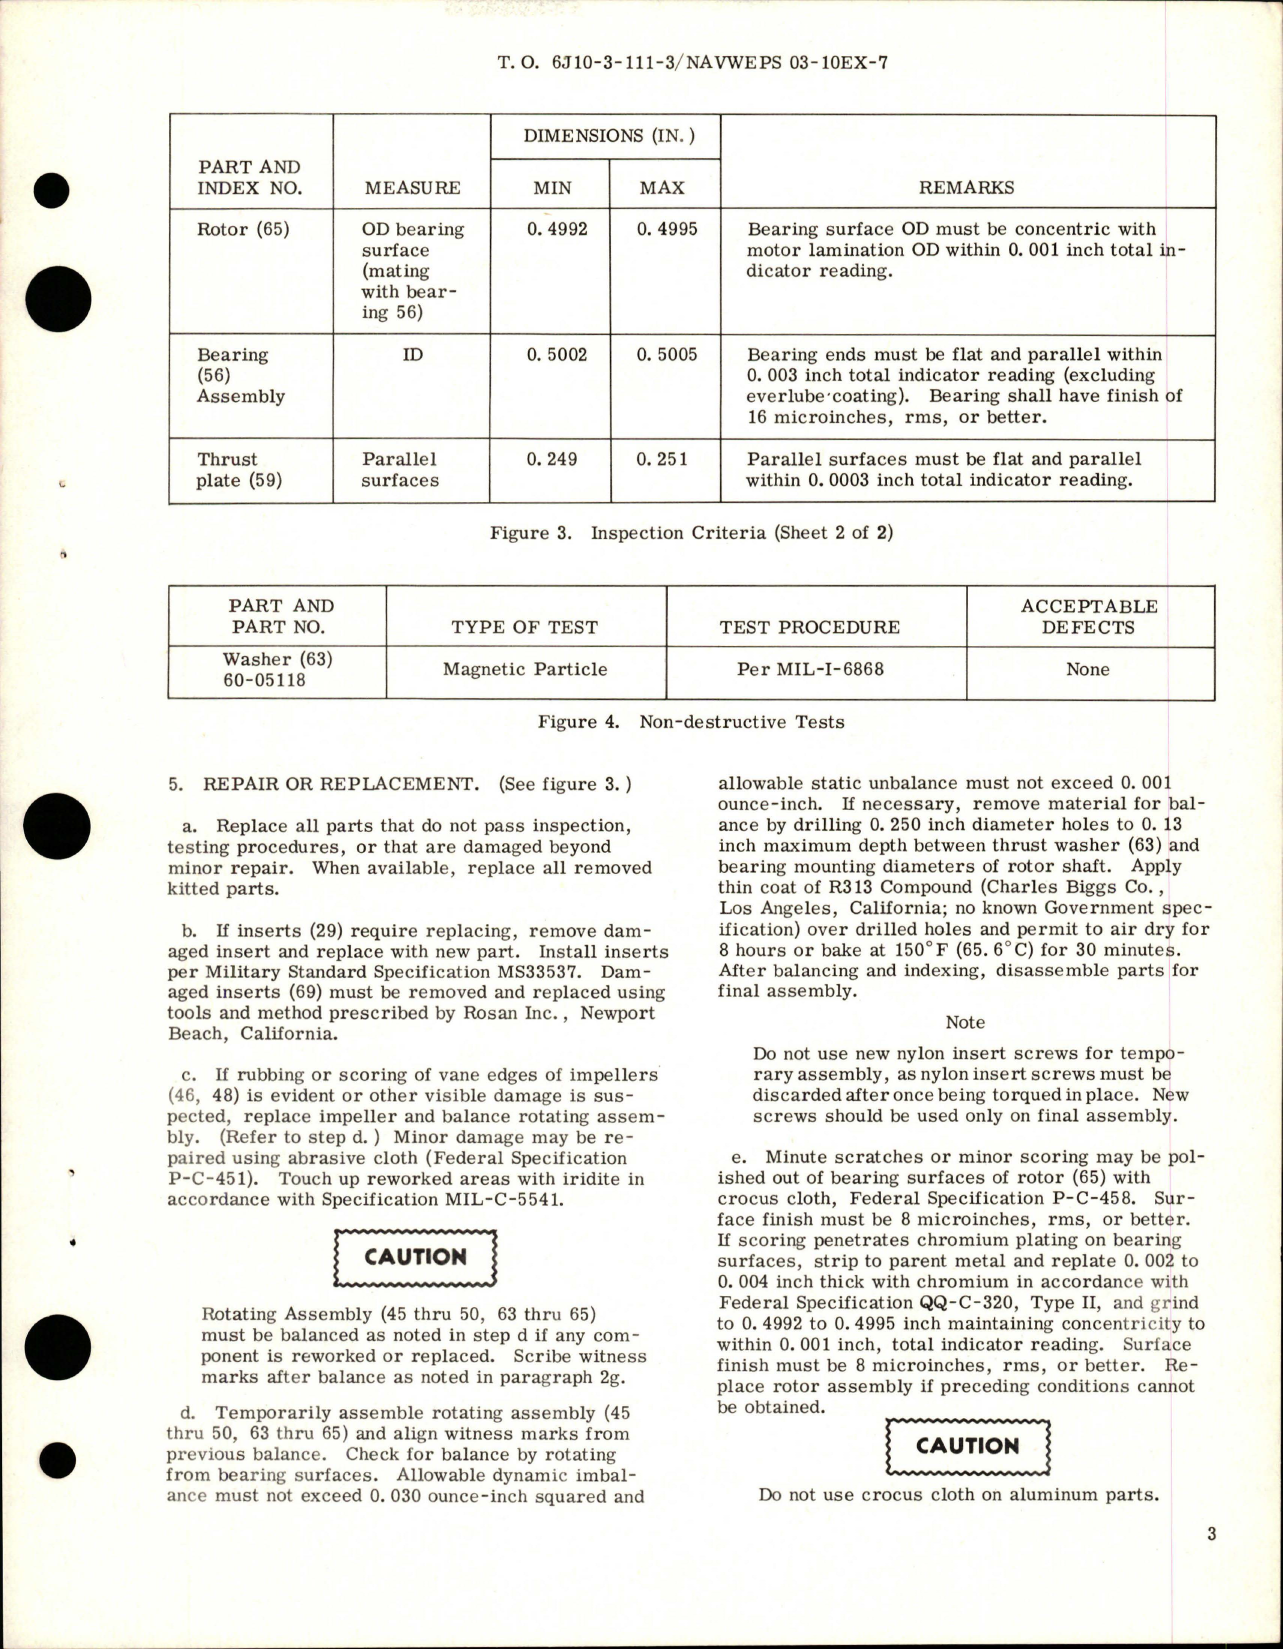 Sample page 5 from AirCorps Library document: Overhaul with Parts Breakdown for Double End Fuel Booster Pump Assembly - Part 60-057C